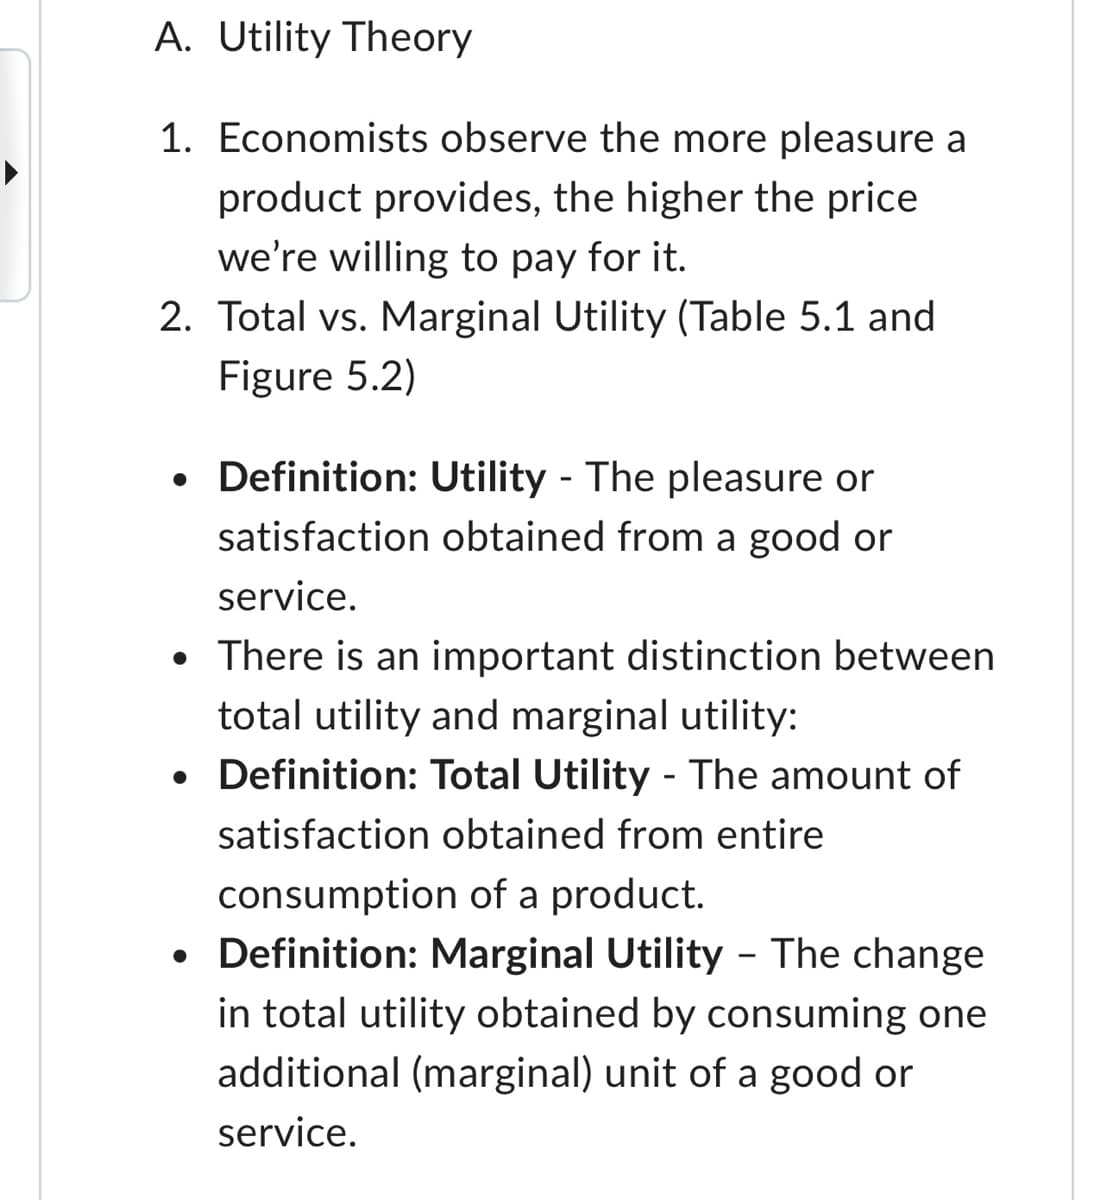 A. Utility Theory
1. Economists observe the more pleasure a
product provides, the higher the price
we're willing to pay for it.
2. Total vs. Marginal Utility (Table 5.1 and
Figure 5.2)
• Definition: Utility The pleasure or
-
satisfaction obtained from a good or
service.
• There is an important distinction between
total utility and marginal utility:
• Definition: Total Utility - The amount of
satisfaction obtained from entire
•
consumption of a product.
Definition: Marginal Utility - The change
in total utility obtained by consuming one
additional (marginal) unit of a good or
service.